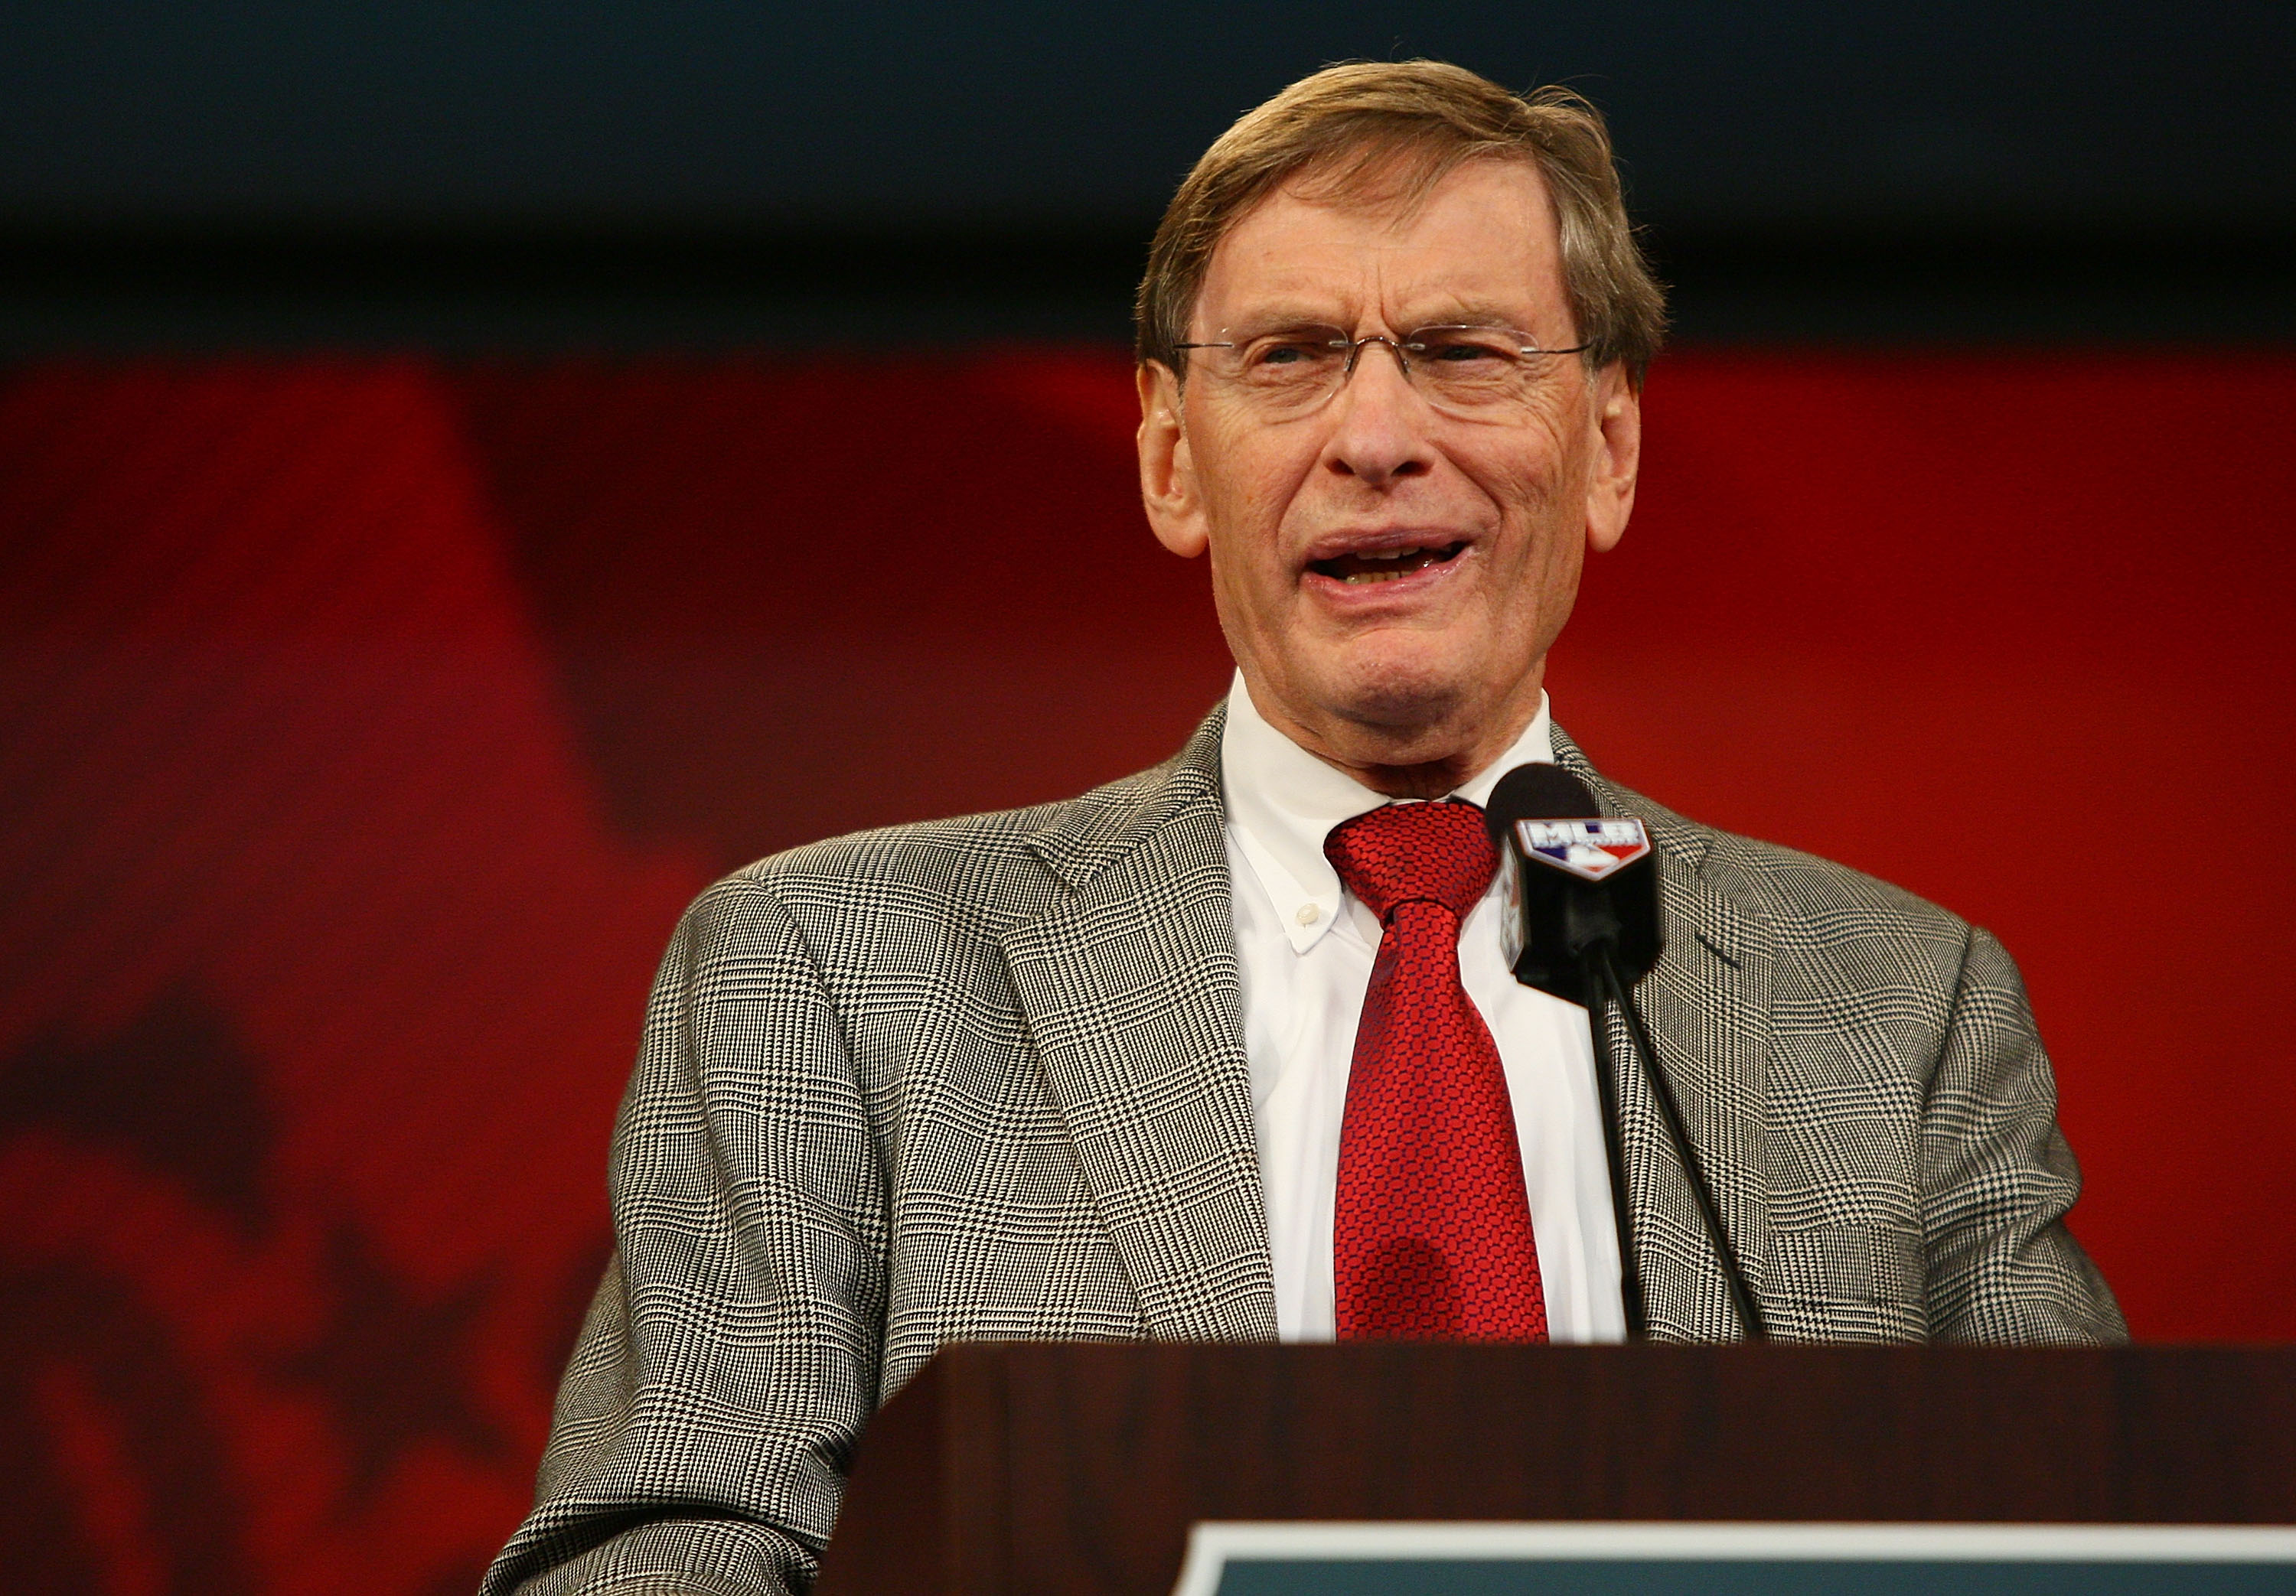 SECAUCUS, NJ - JUNE 07:  MLB commissioner Bud Selig speaks during the MLB First Year Player Draft on June 7, 2010 held in Studio 42 at the MLB Network in Secaucus, New Jersey.  (Photo by Mike Stobe/Getty Images)